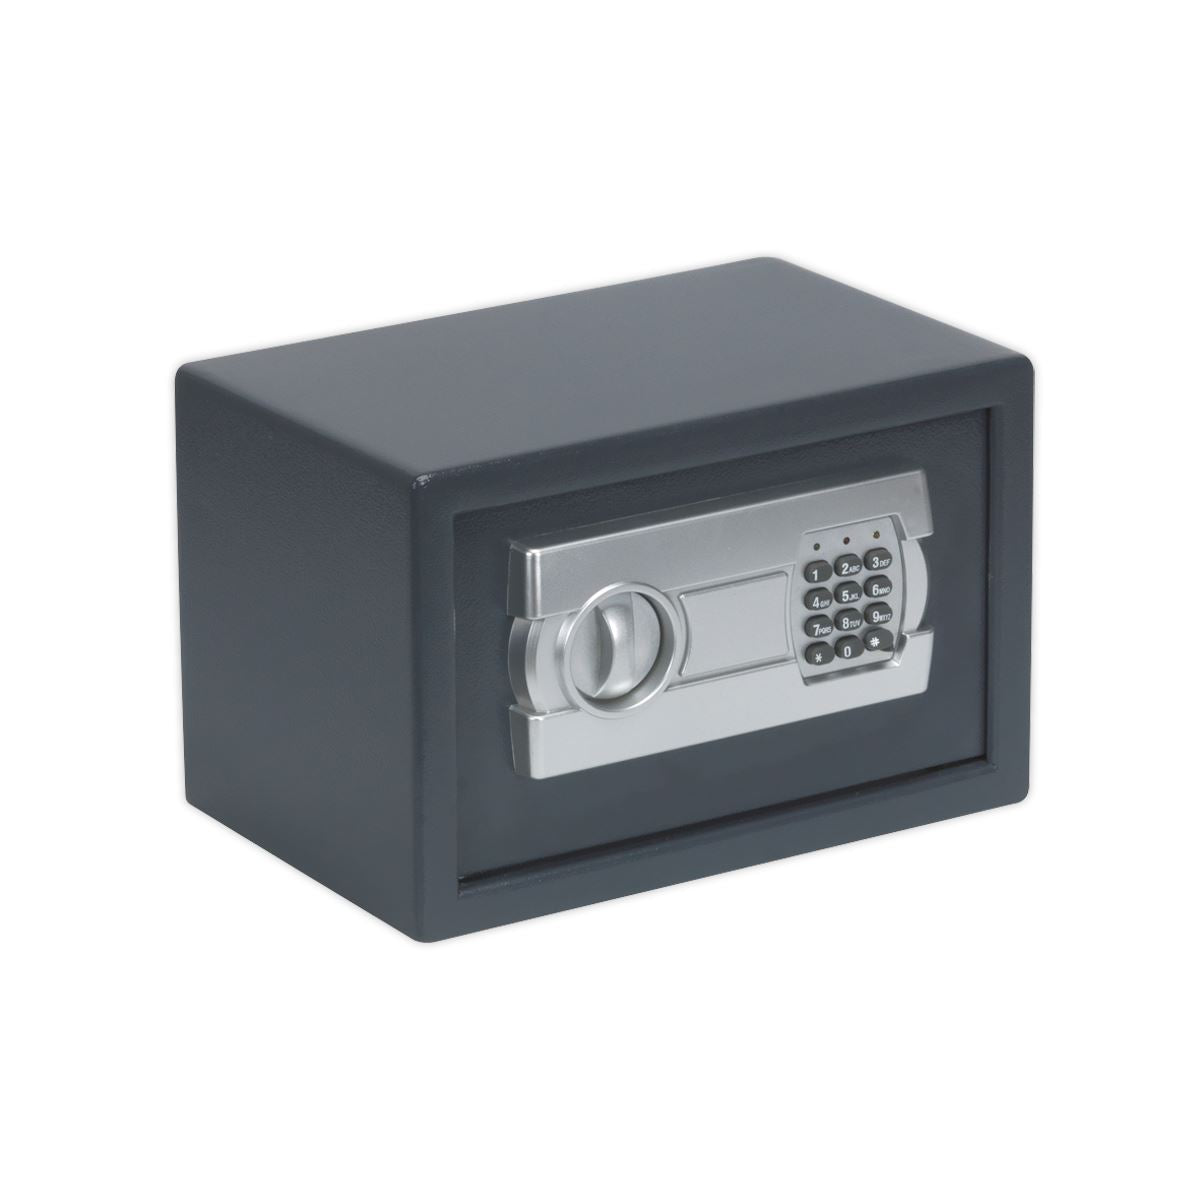 Sealey Electronic Combination Security Safe 310 x 200 x 200mm